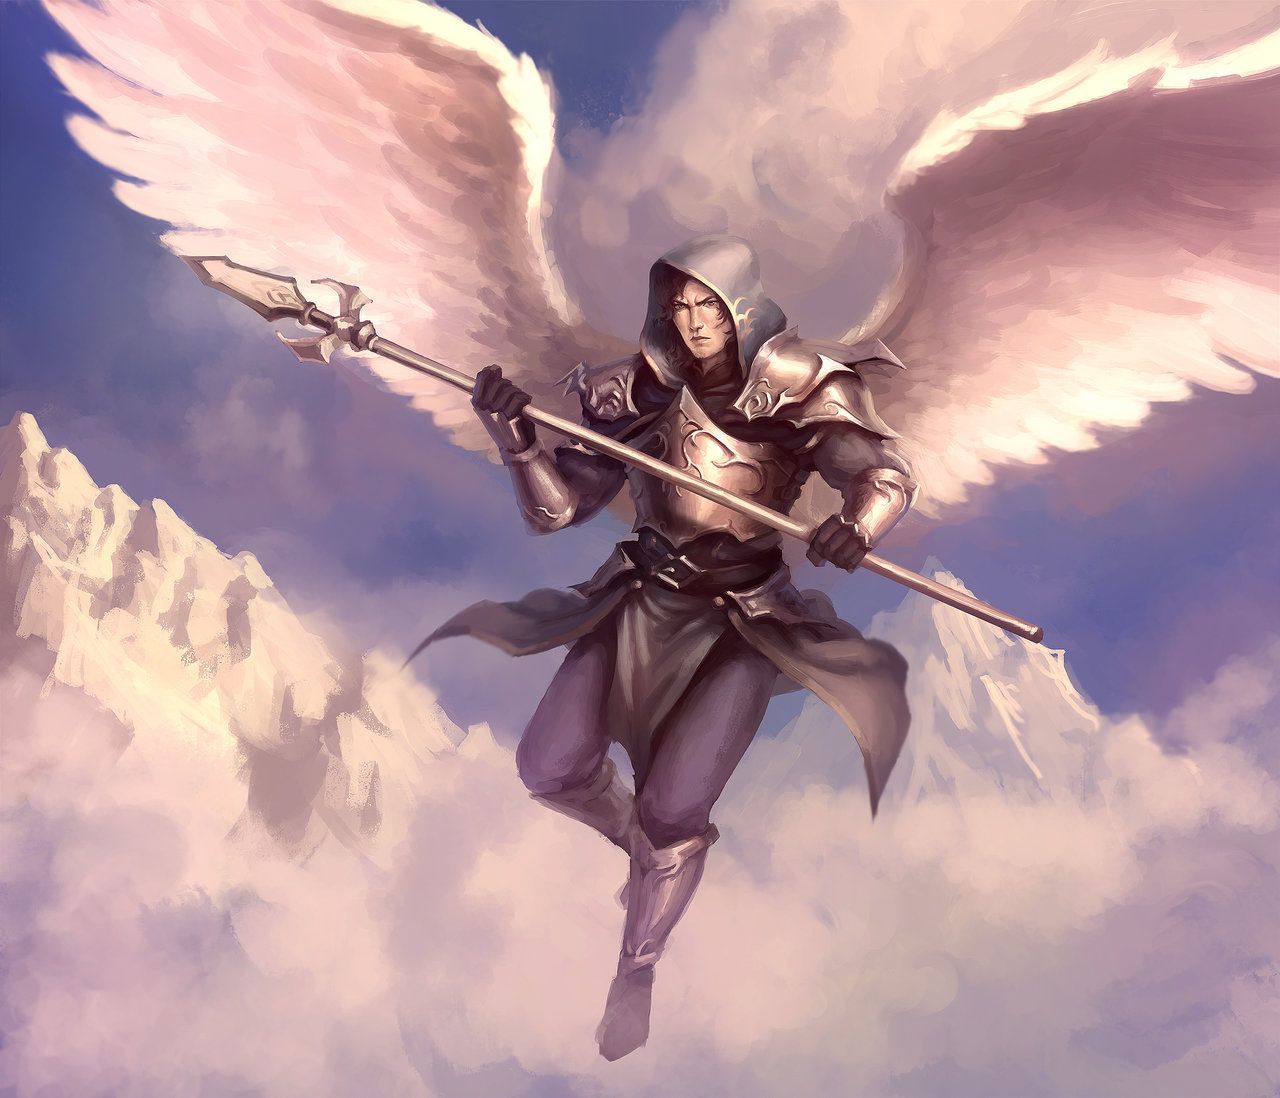 Show full-size image of AMAZING ANGELIC WARRIOR HE IS A MUST HAVE.